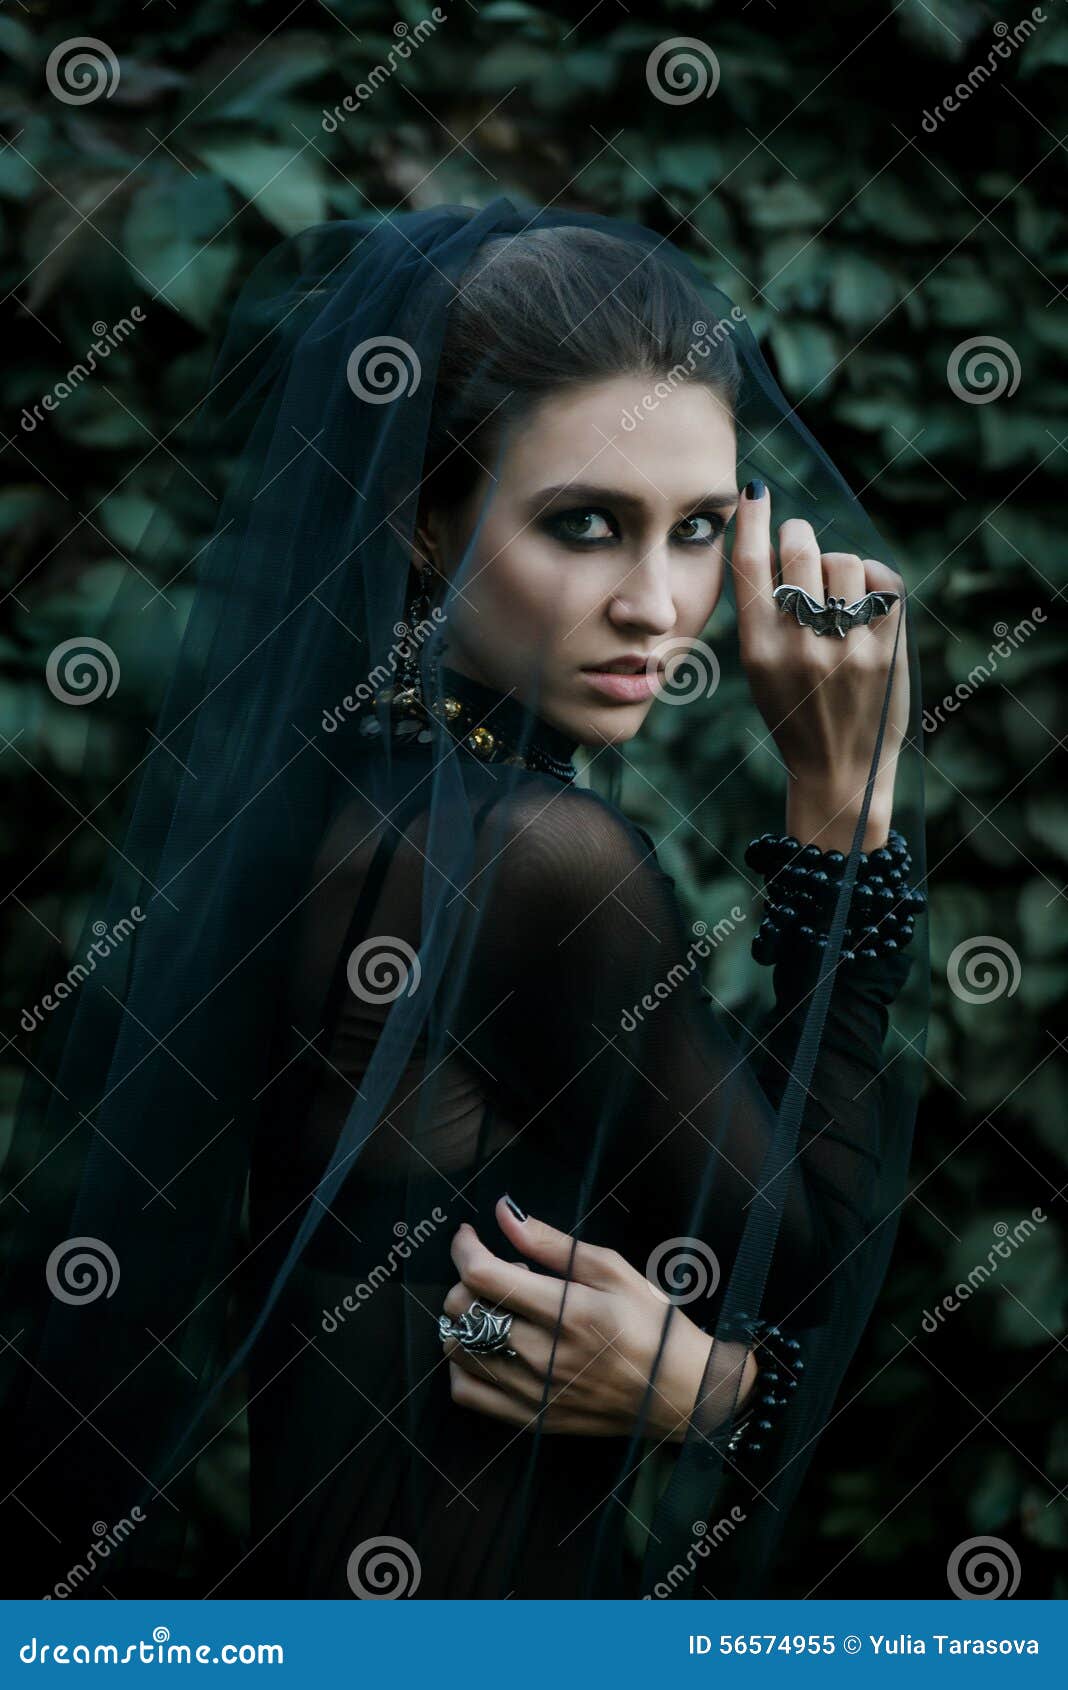 fashion model dressed in gothic style. vamp.